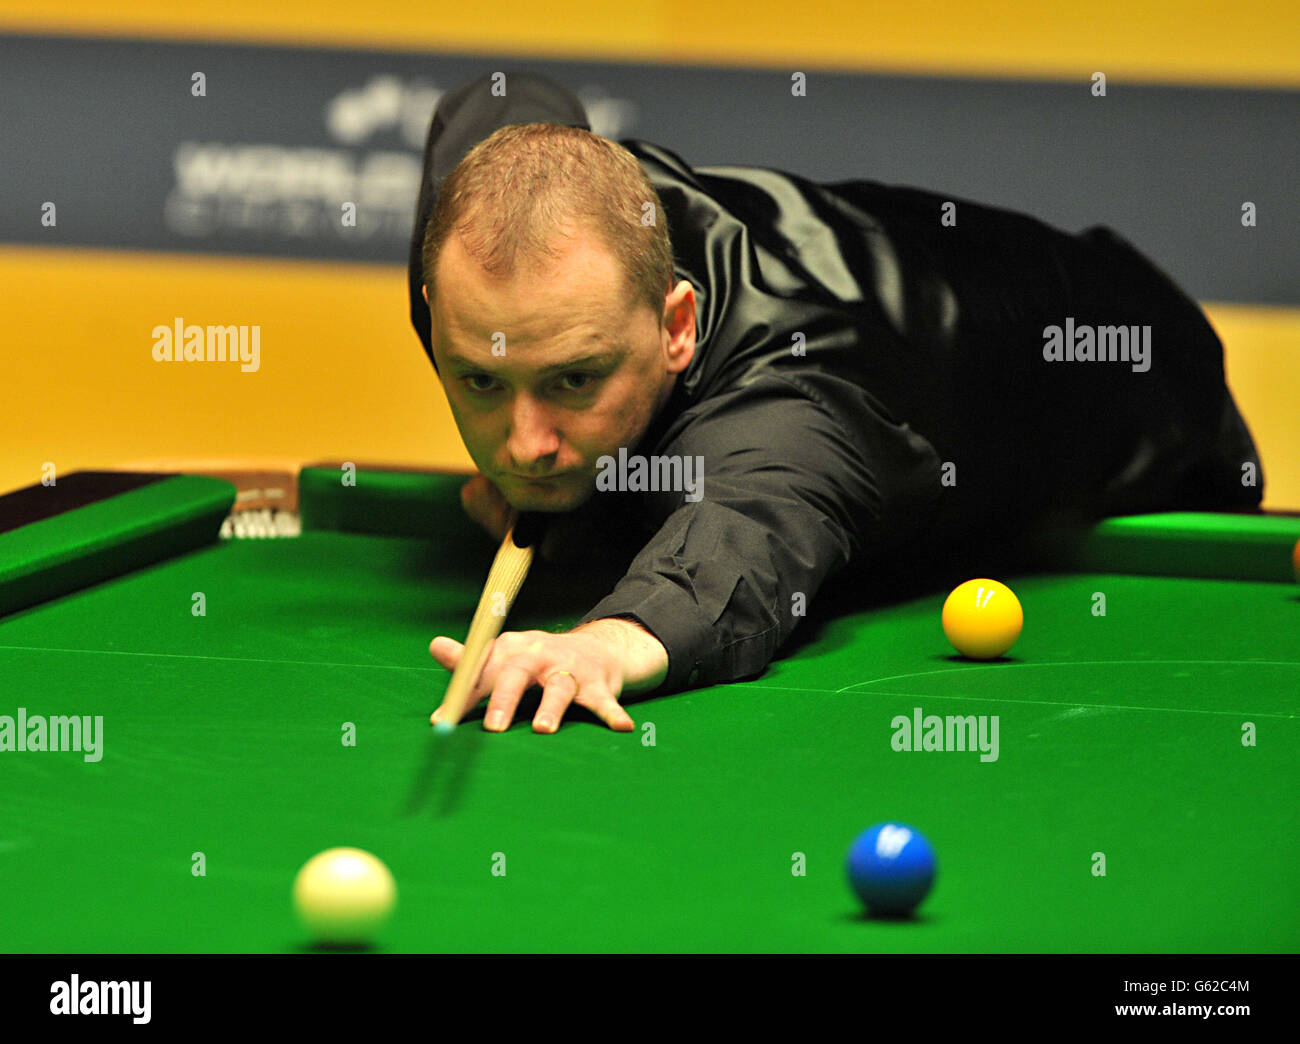 Graeme Dott in action during his second round match against Shaun Murphy during the Betfair World Championships at the Crucible, Sheffield. Stock Photo